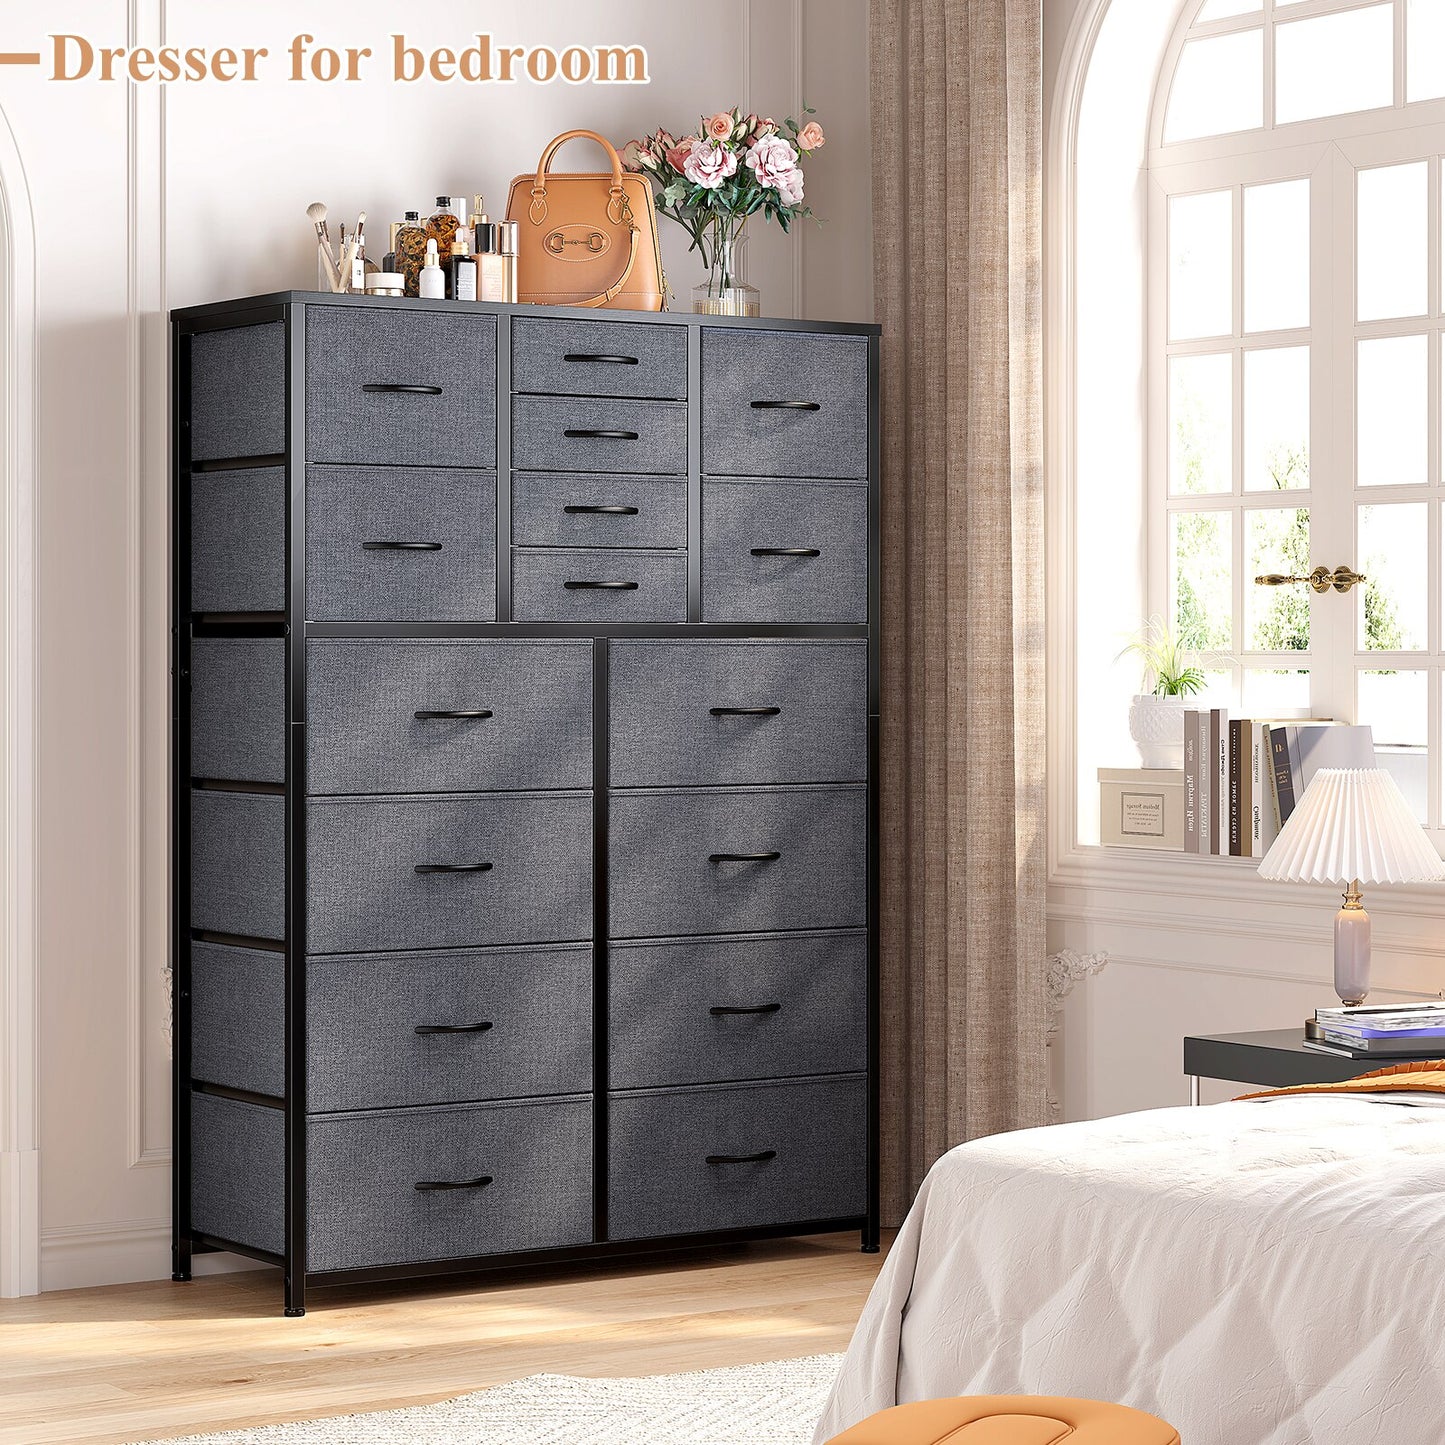 EnHomee 16 Fabric Drawer Dresser with Wooden Top Bedroom Closets Furniture Large Capacity Tall Chest Dressers for Living Room